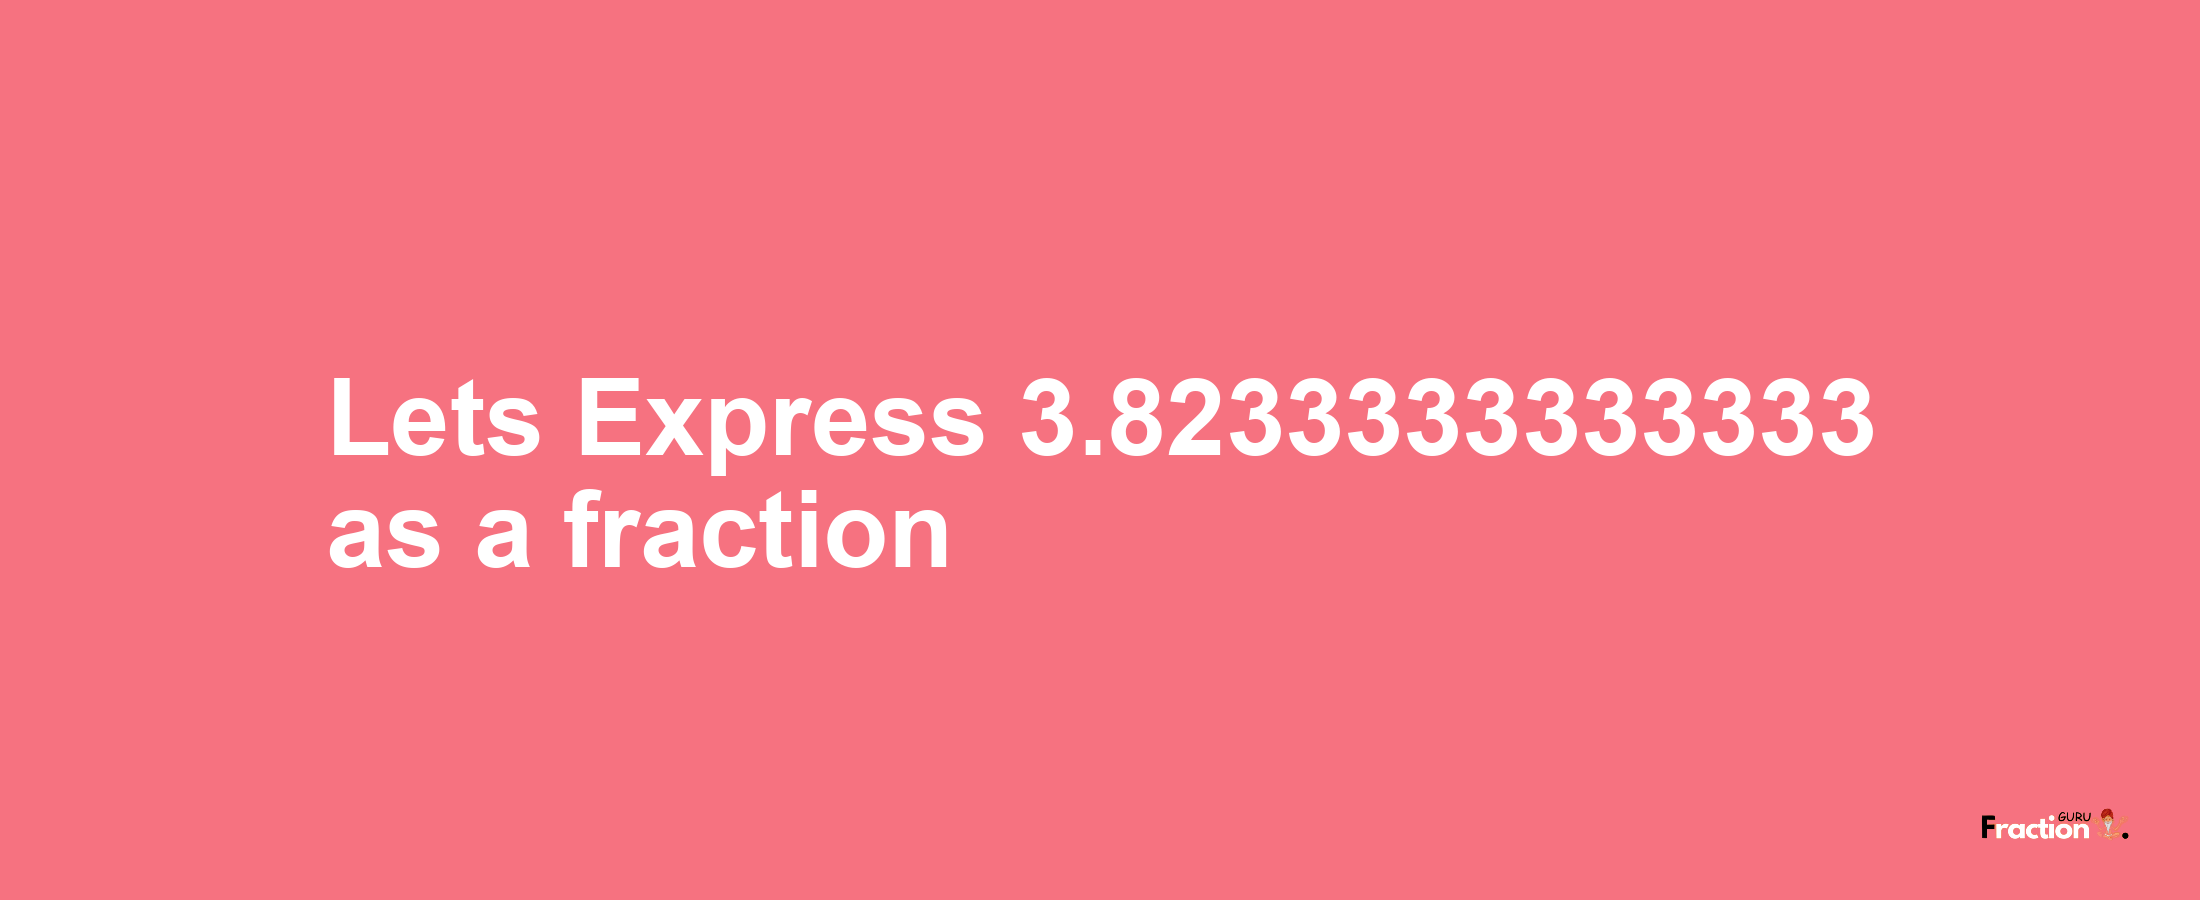 Lets Express 3.8233333333333 as afraction